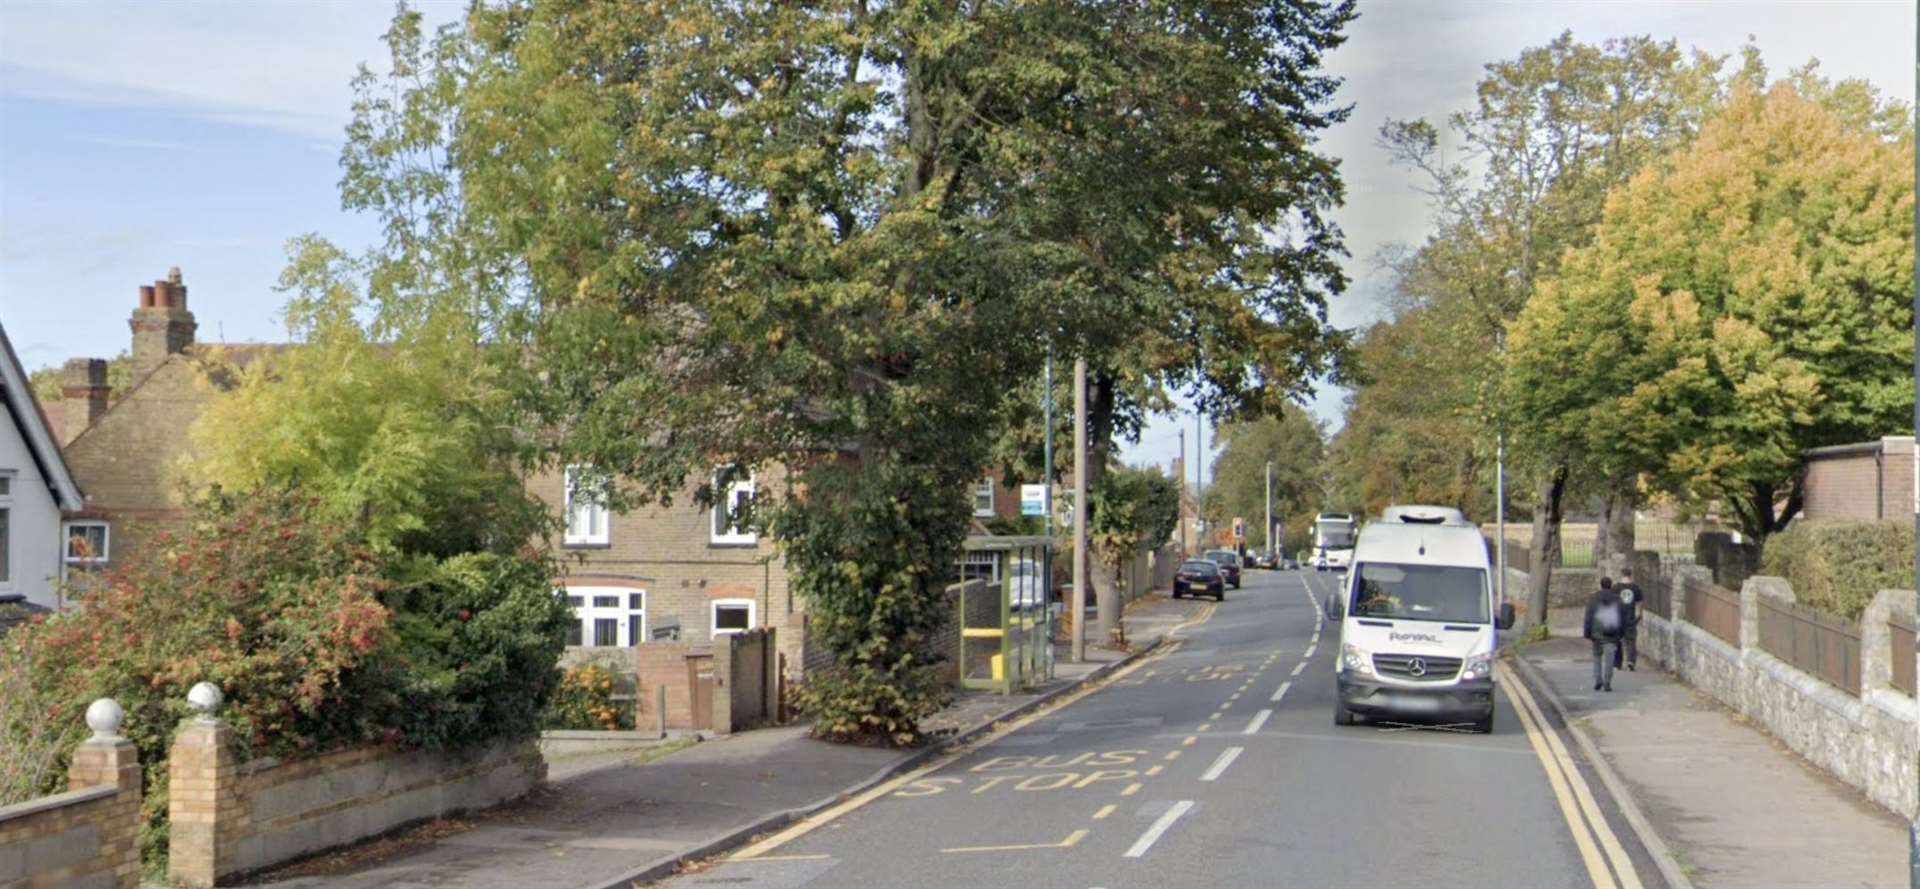 Emergency services were called to Maidstone Road, Chatham. Picture: Google Maps